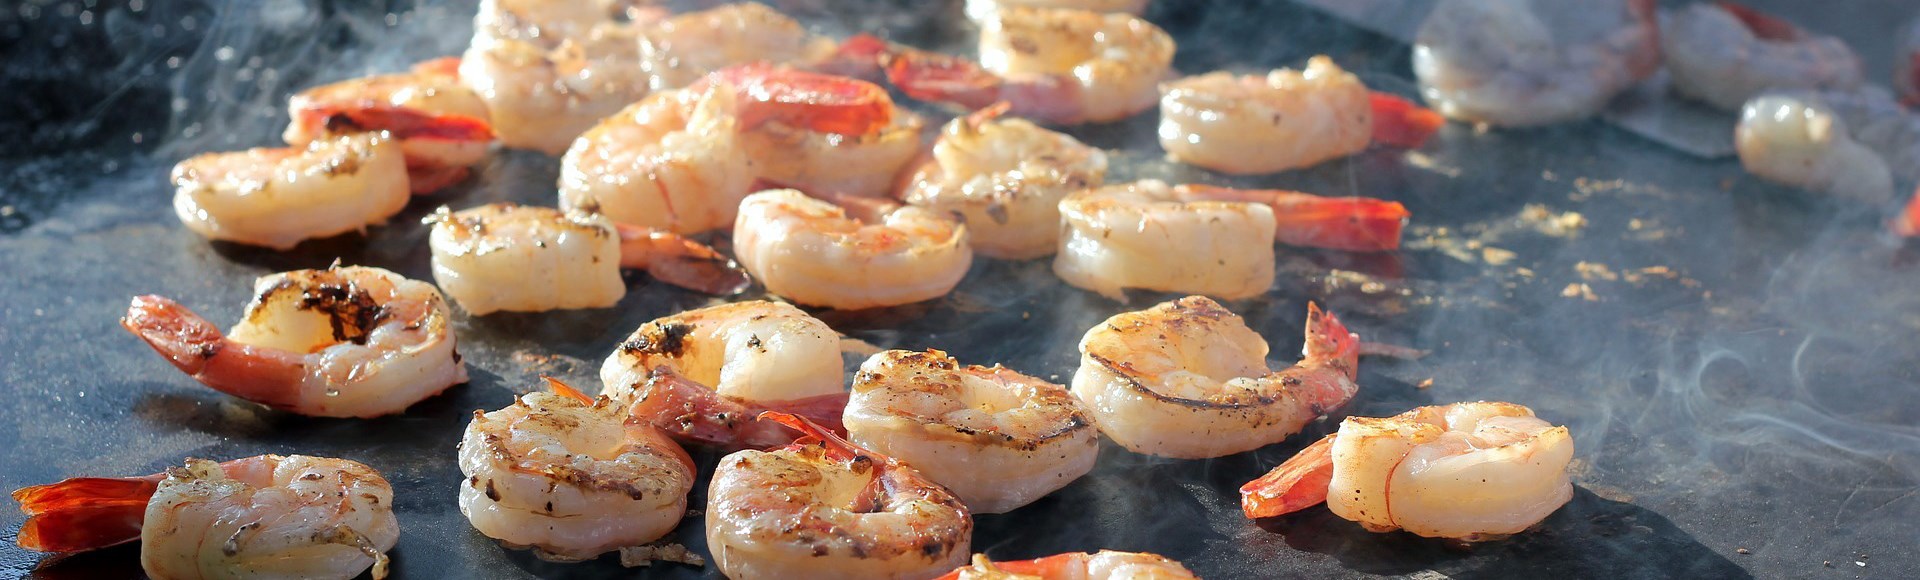 shrimps-cooked-on-a-flat-top-grill - Alargo Private Chef Service in Crete | Christos & Michael